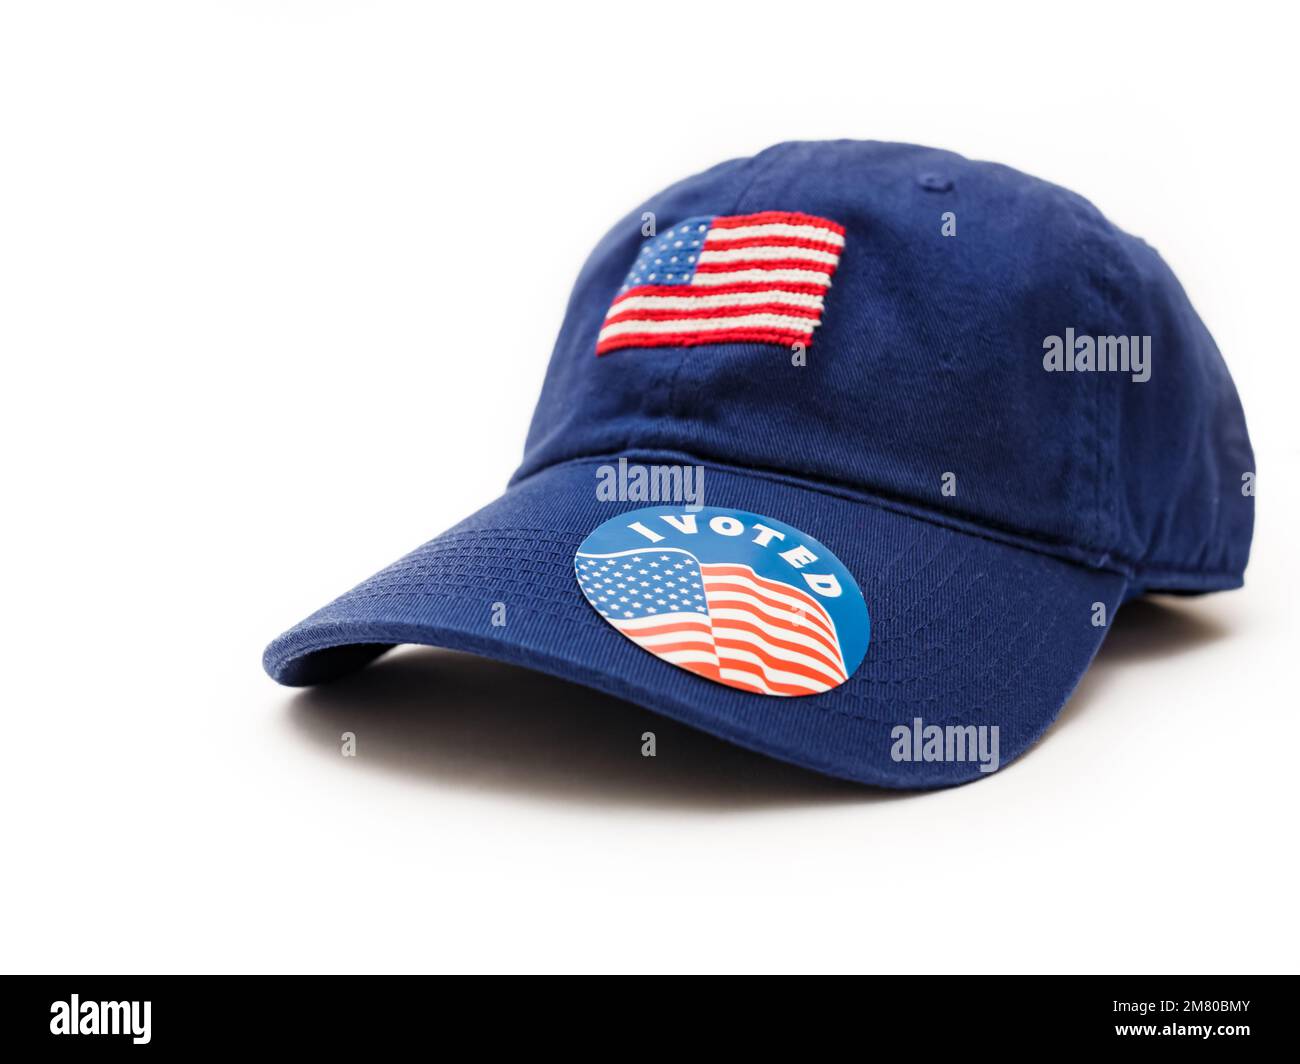 I Voted sticker on a patriotic blue baseball hat with American flag on white background. Stock Photo